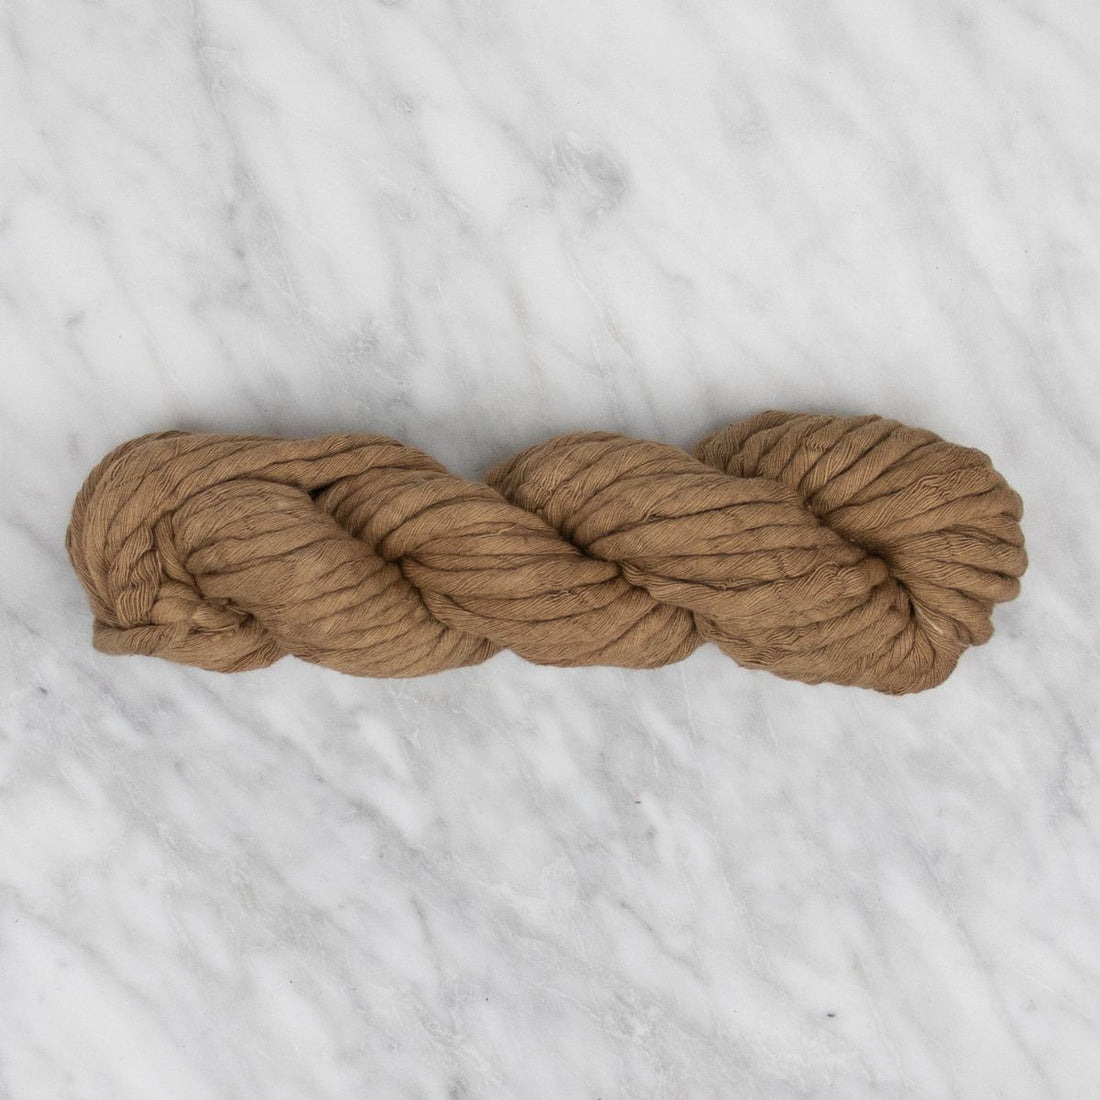 5mm Hand-Dyed Cotton String - Driftwood - 100 grams